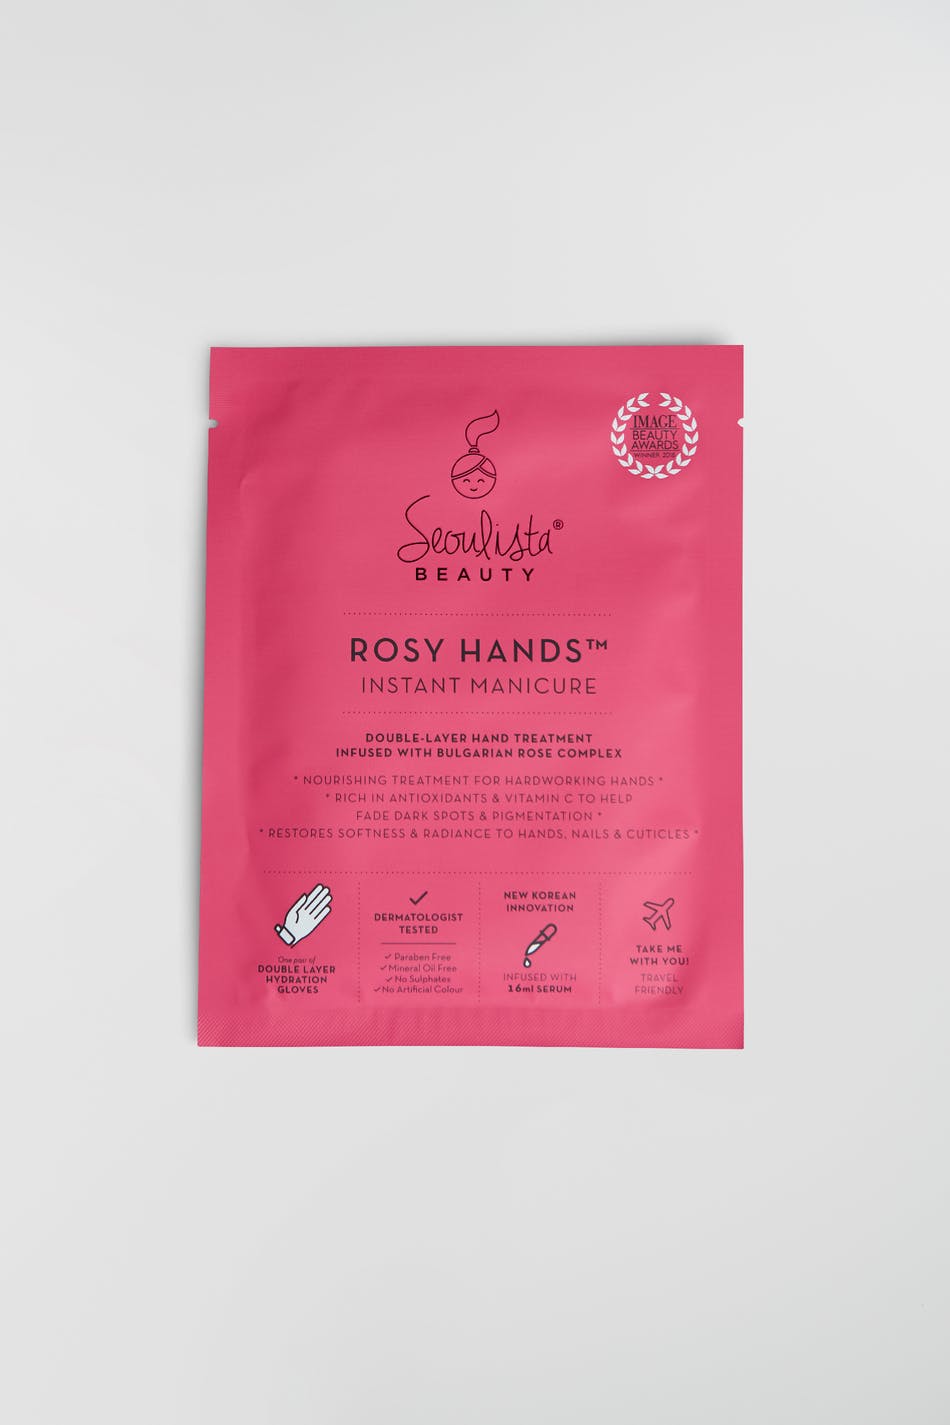 Rosy hands instant manicure